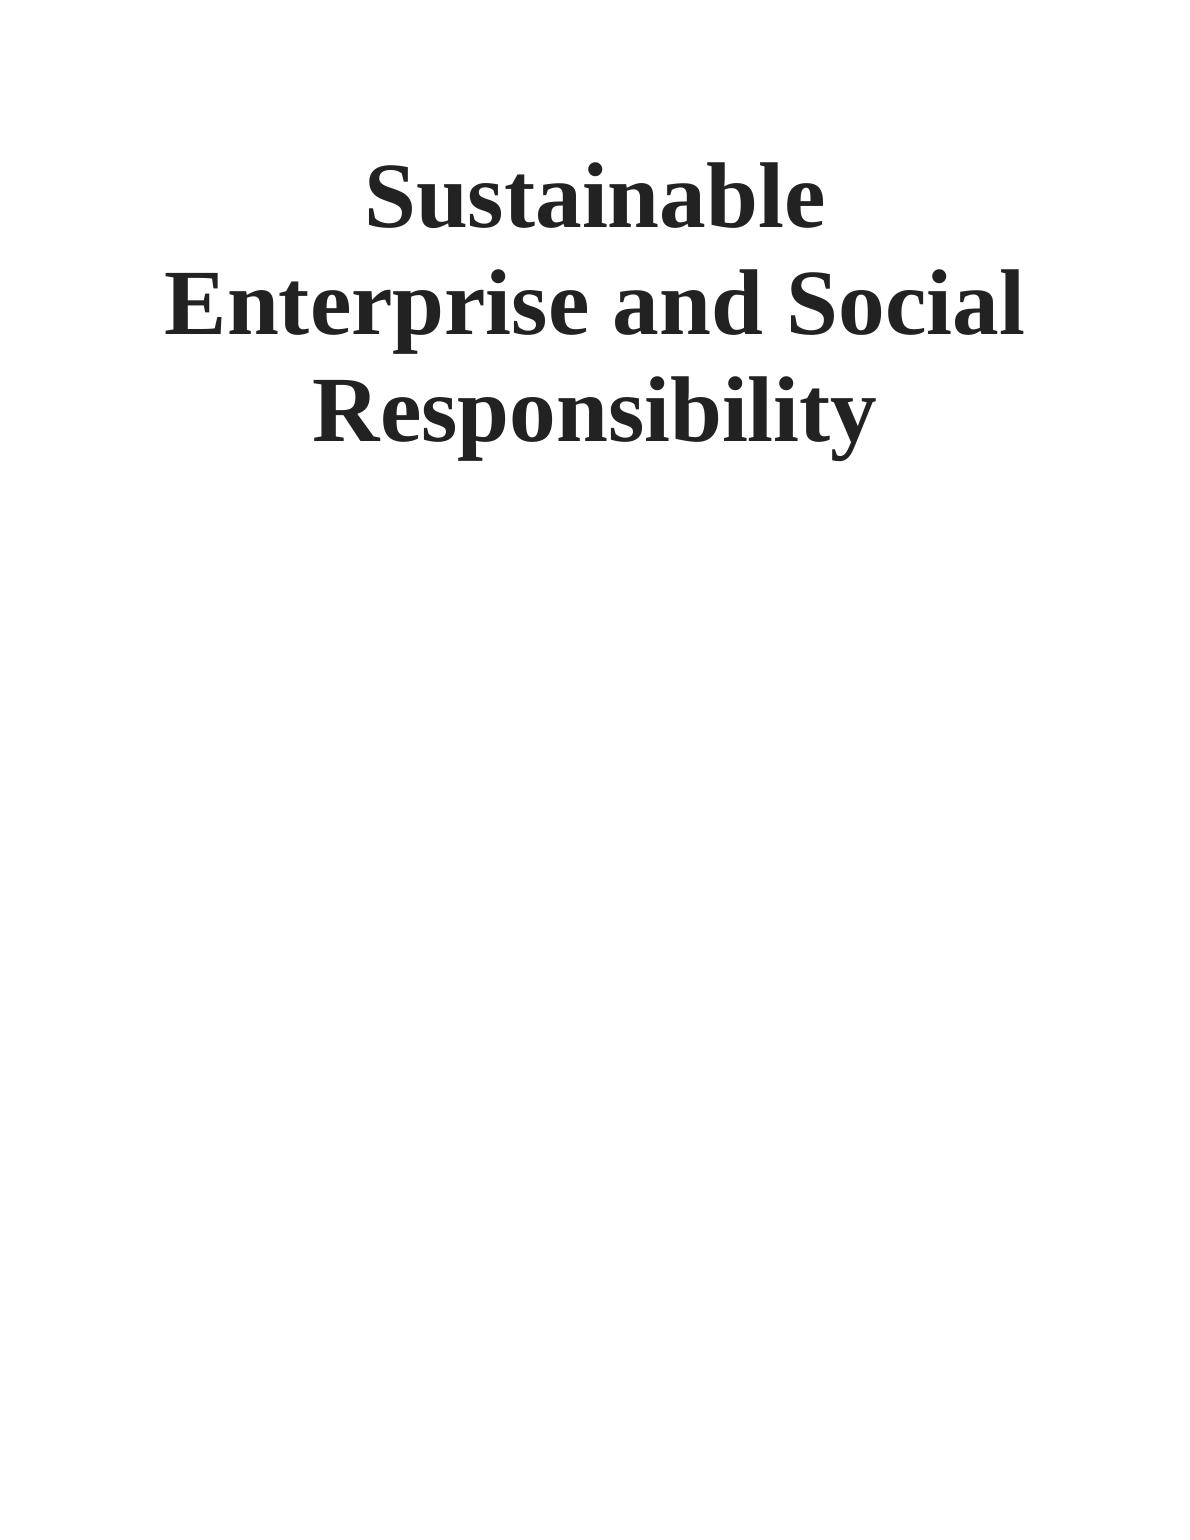 Sustainability and Corporate Social Responsibility PDF_1